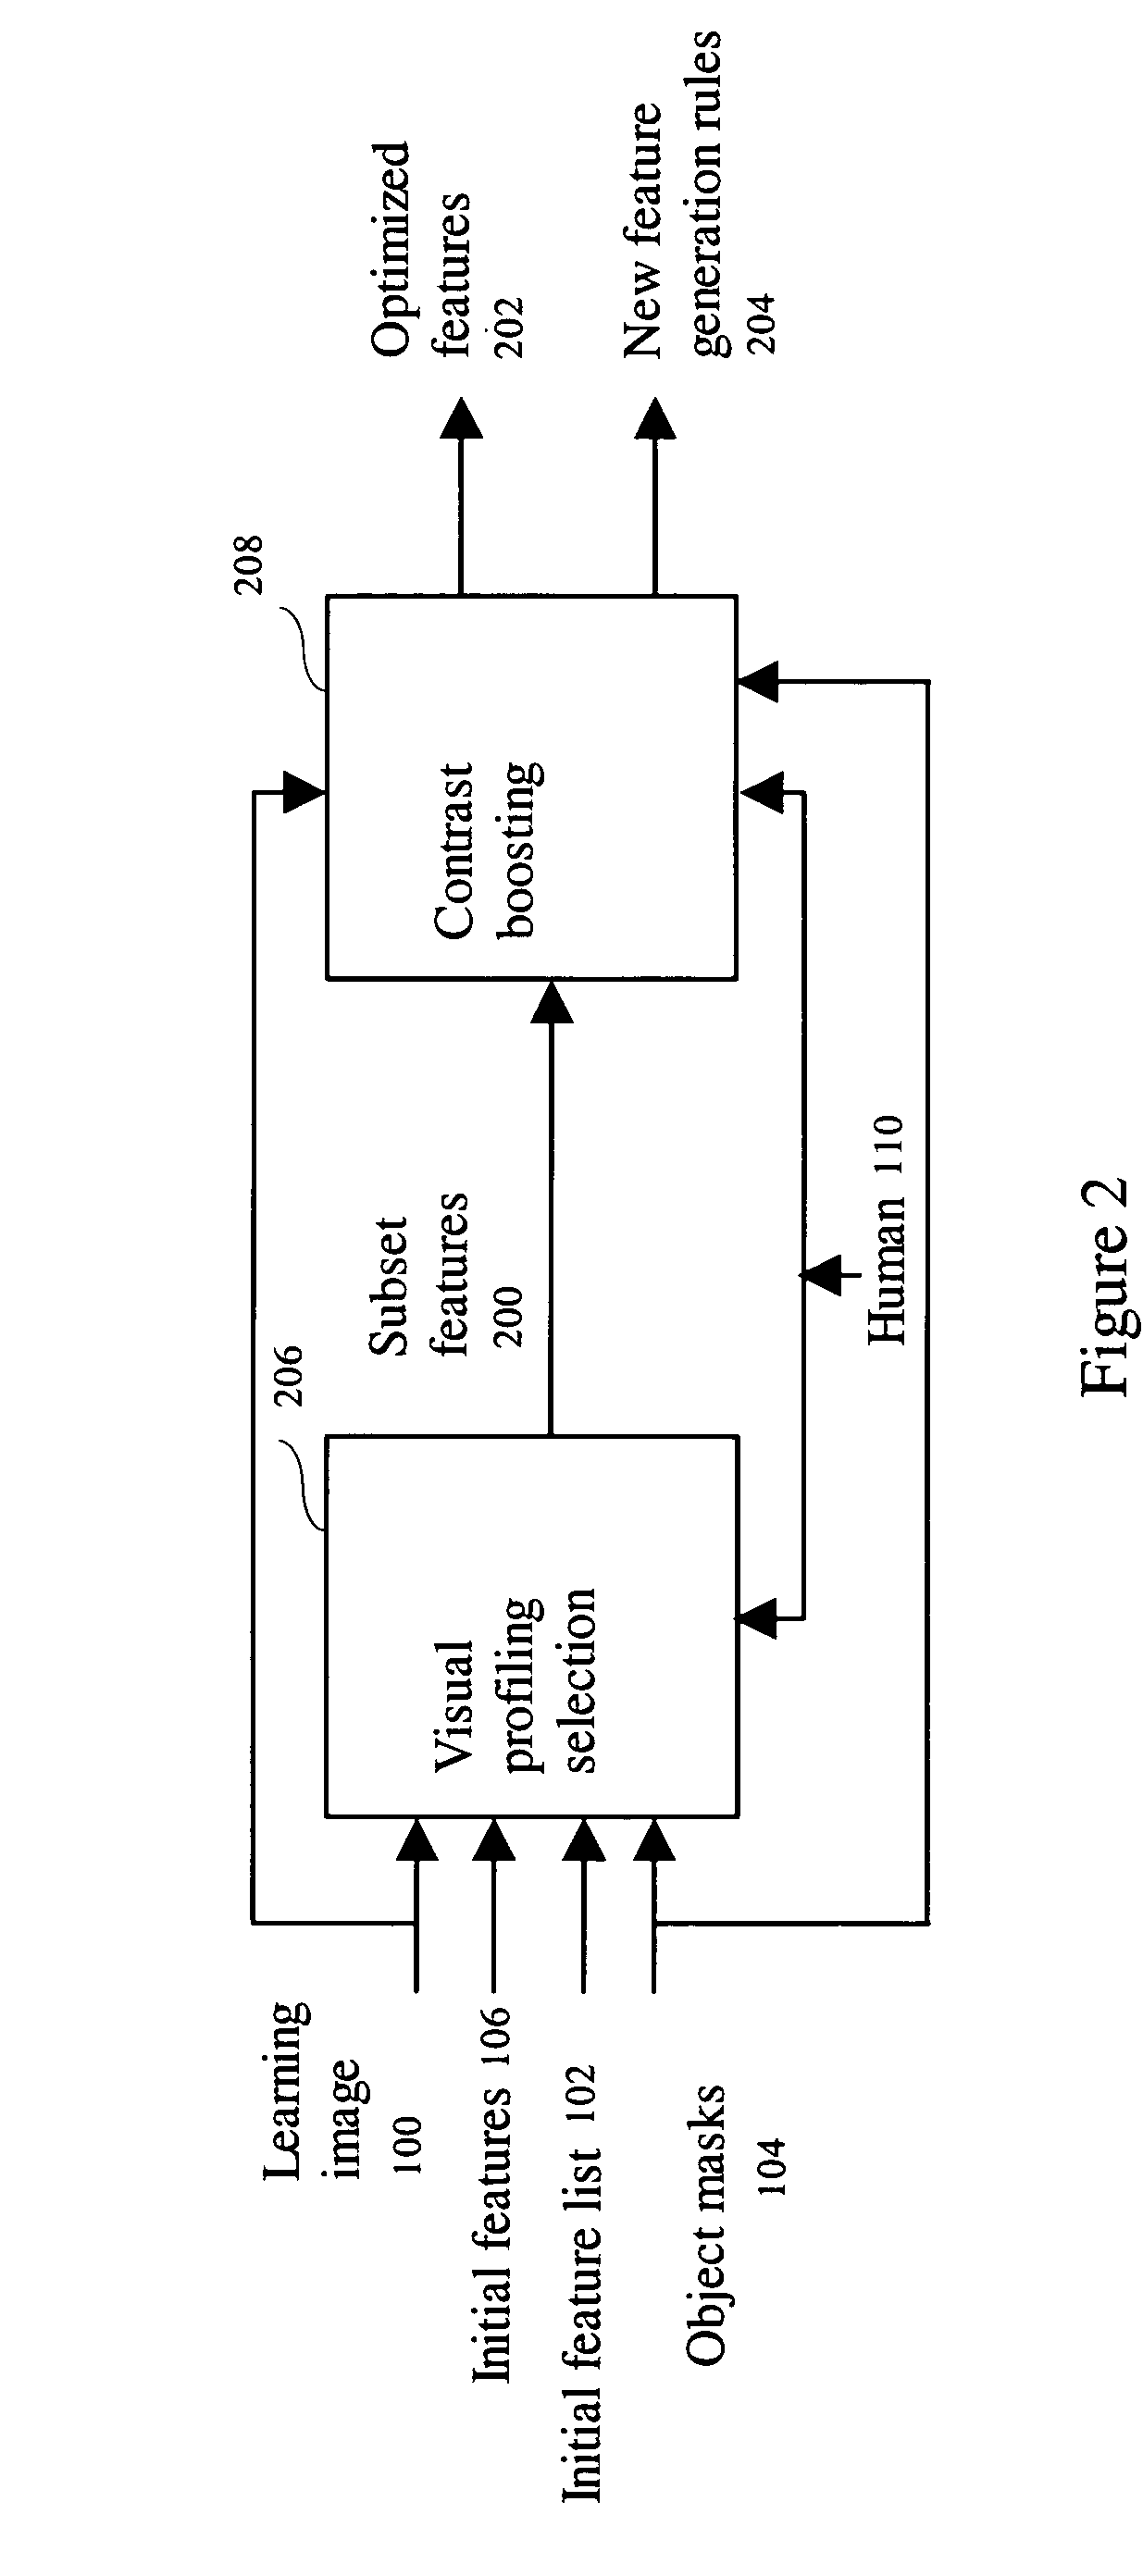 Method of directed feature development for image pattern recognition